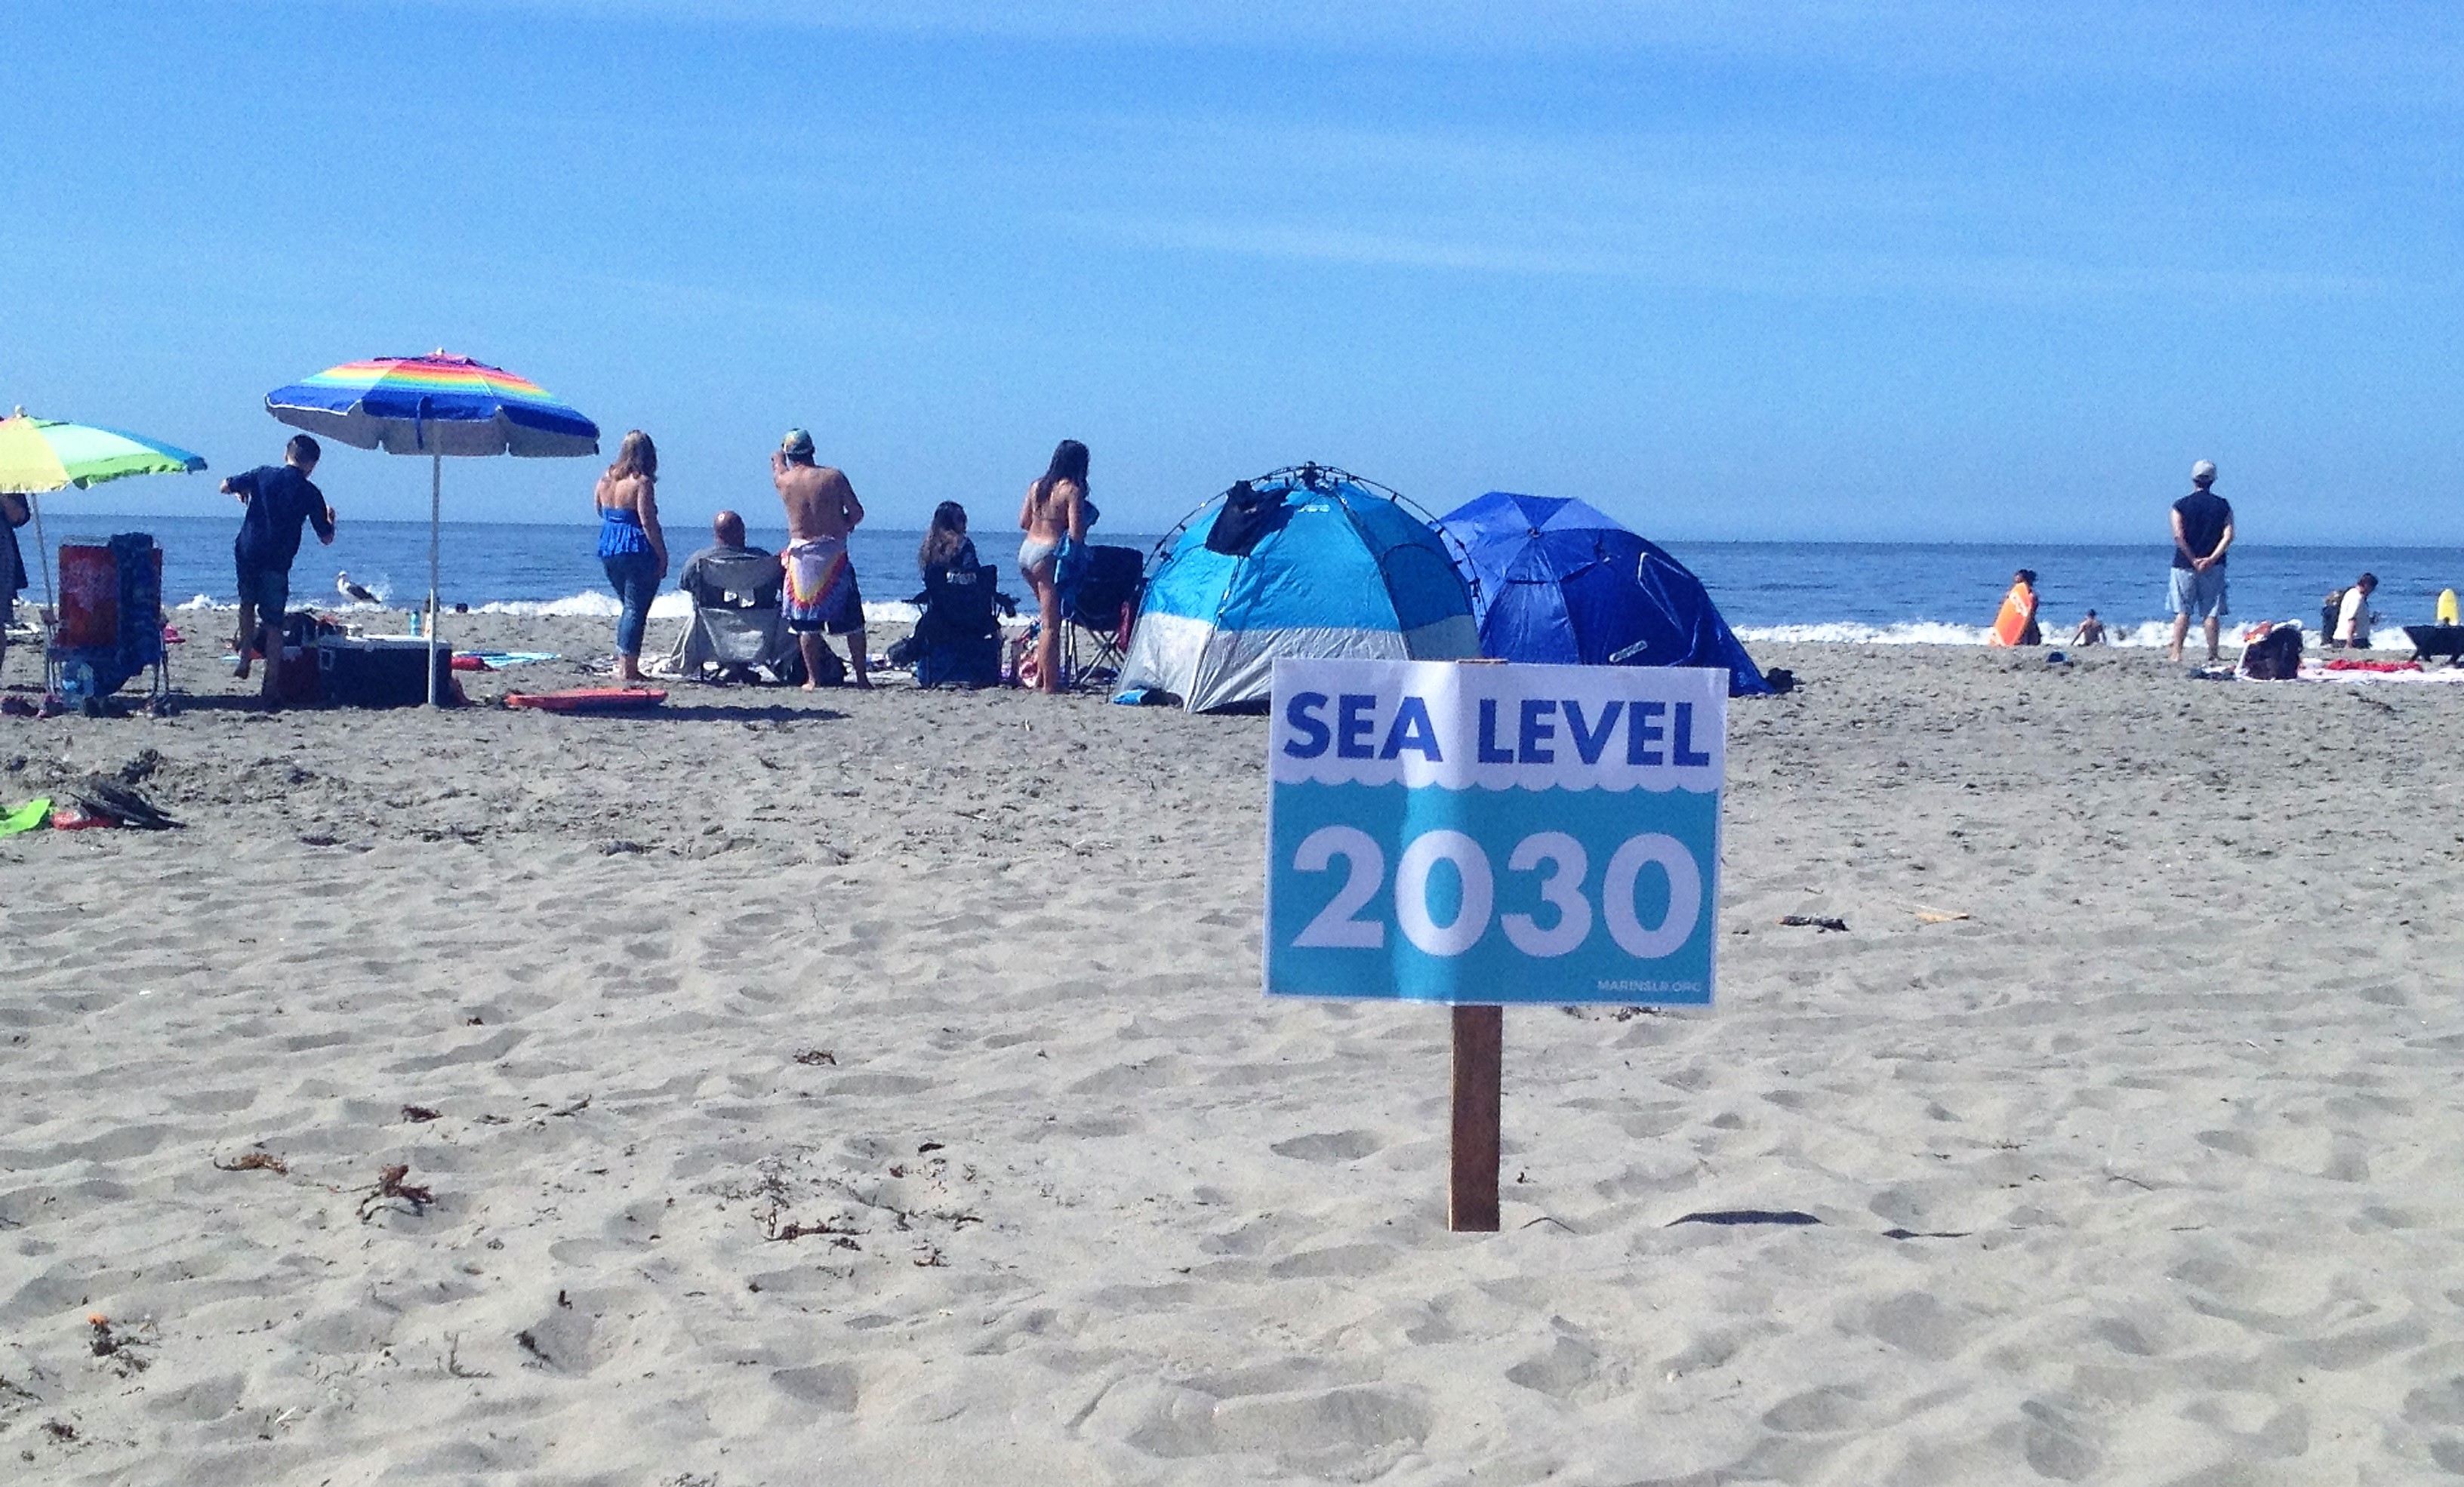 A sign in the sand at Stinson Beach says "Sea Level, 2030" as a reminder about climate change.